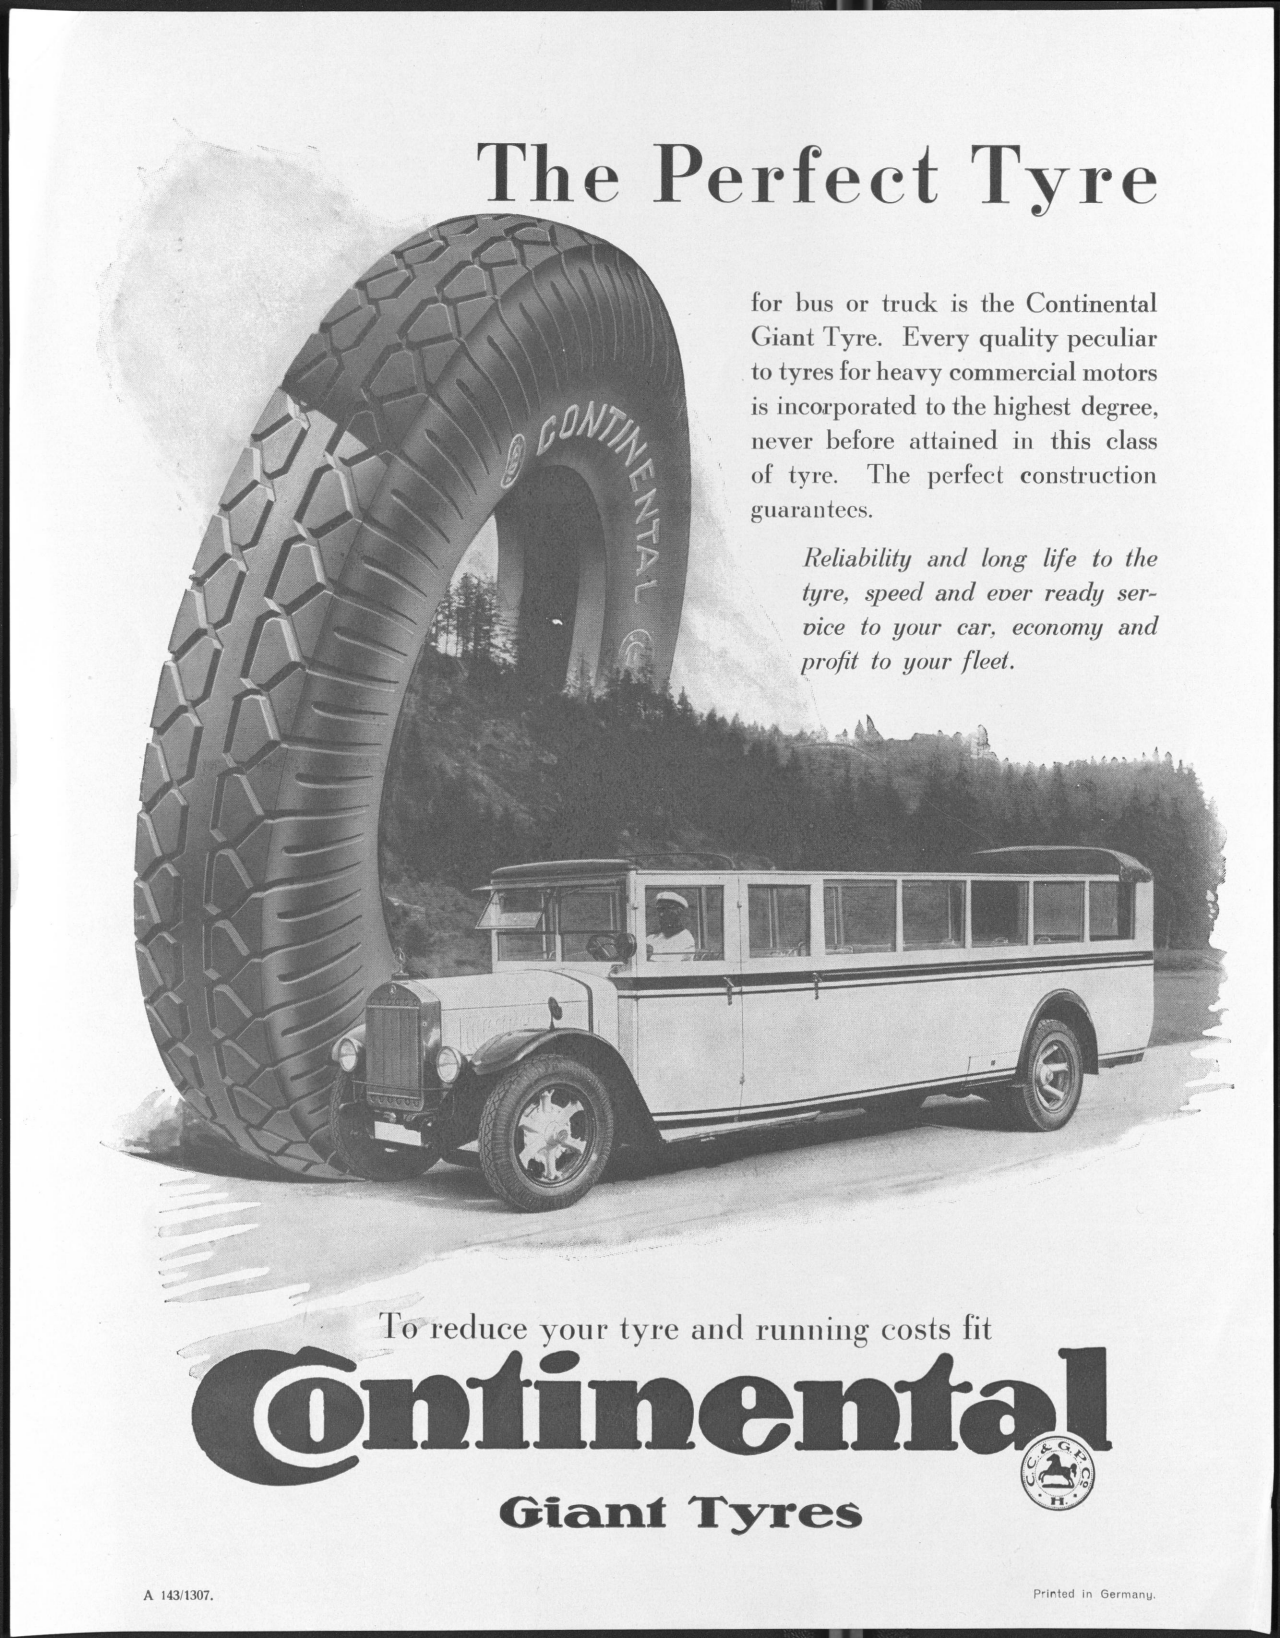 Early on Continental had the needs of fleet owners in mind.